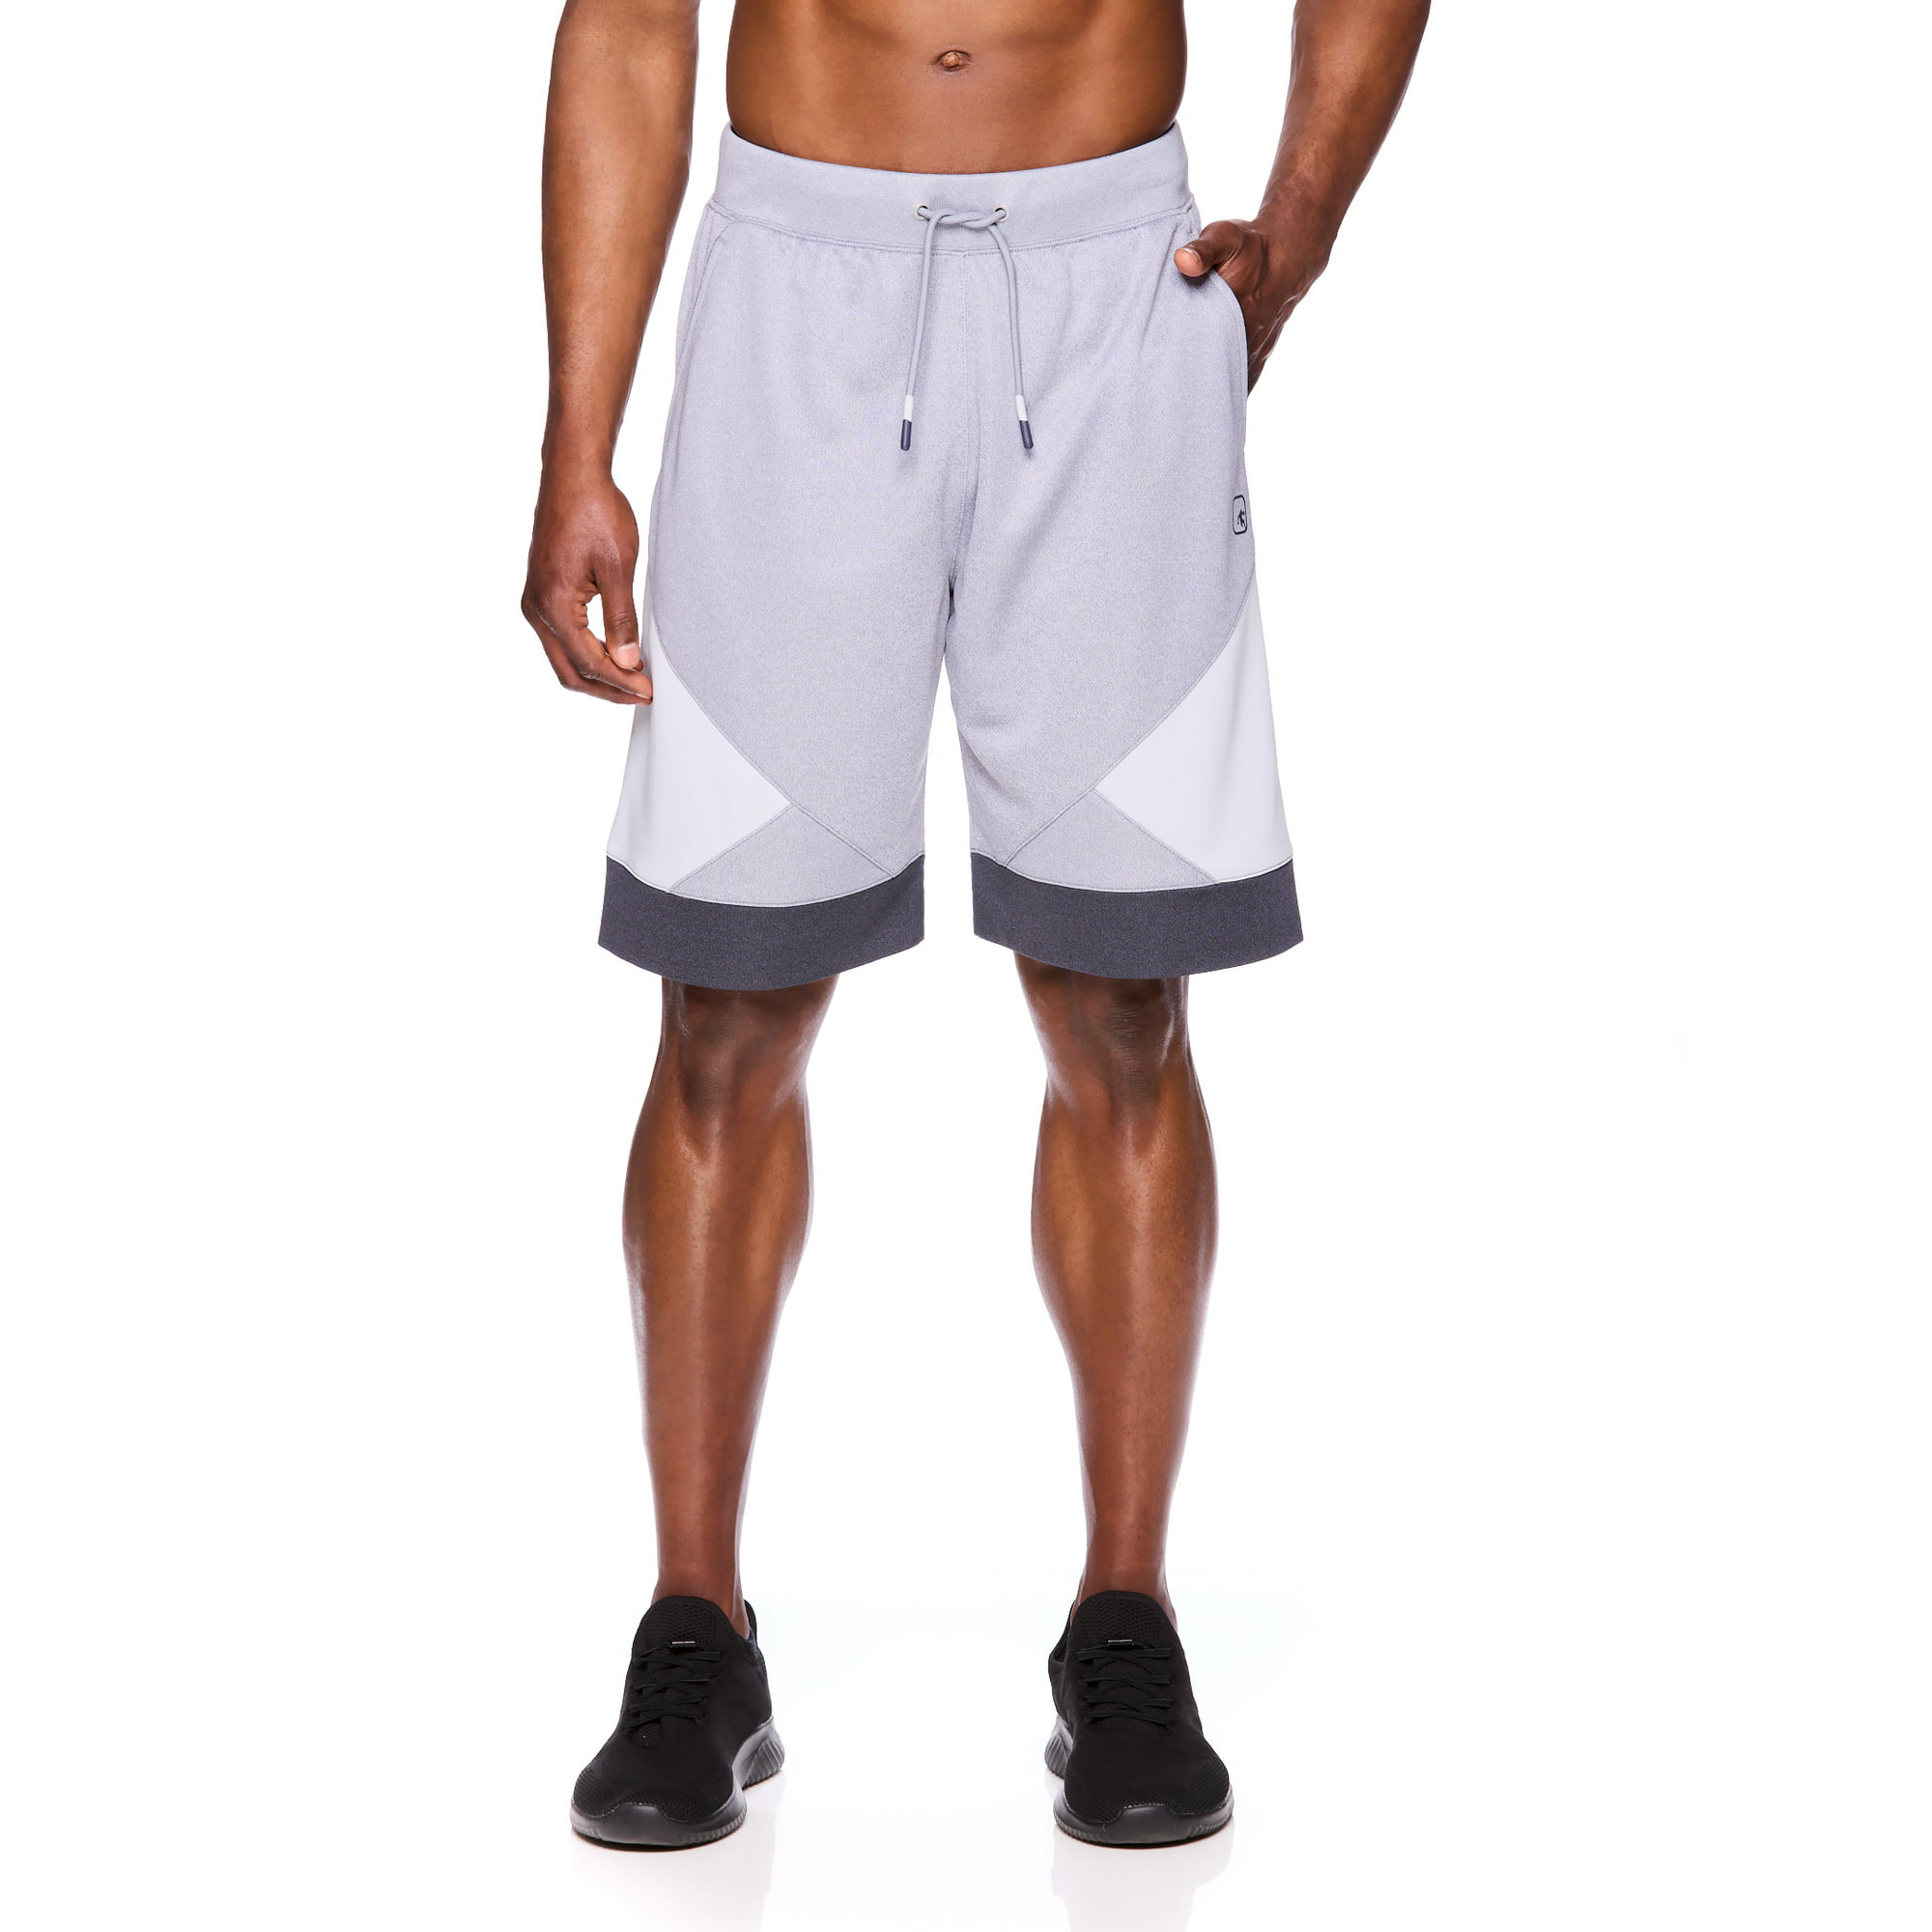 New Mens Basketball Shorts by And1.**Adjustable Elastic Waist Size M.****